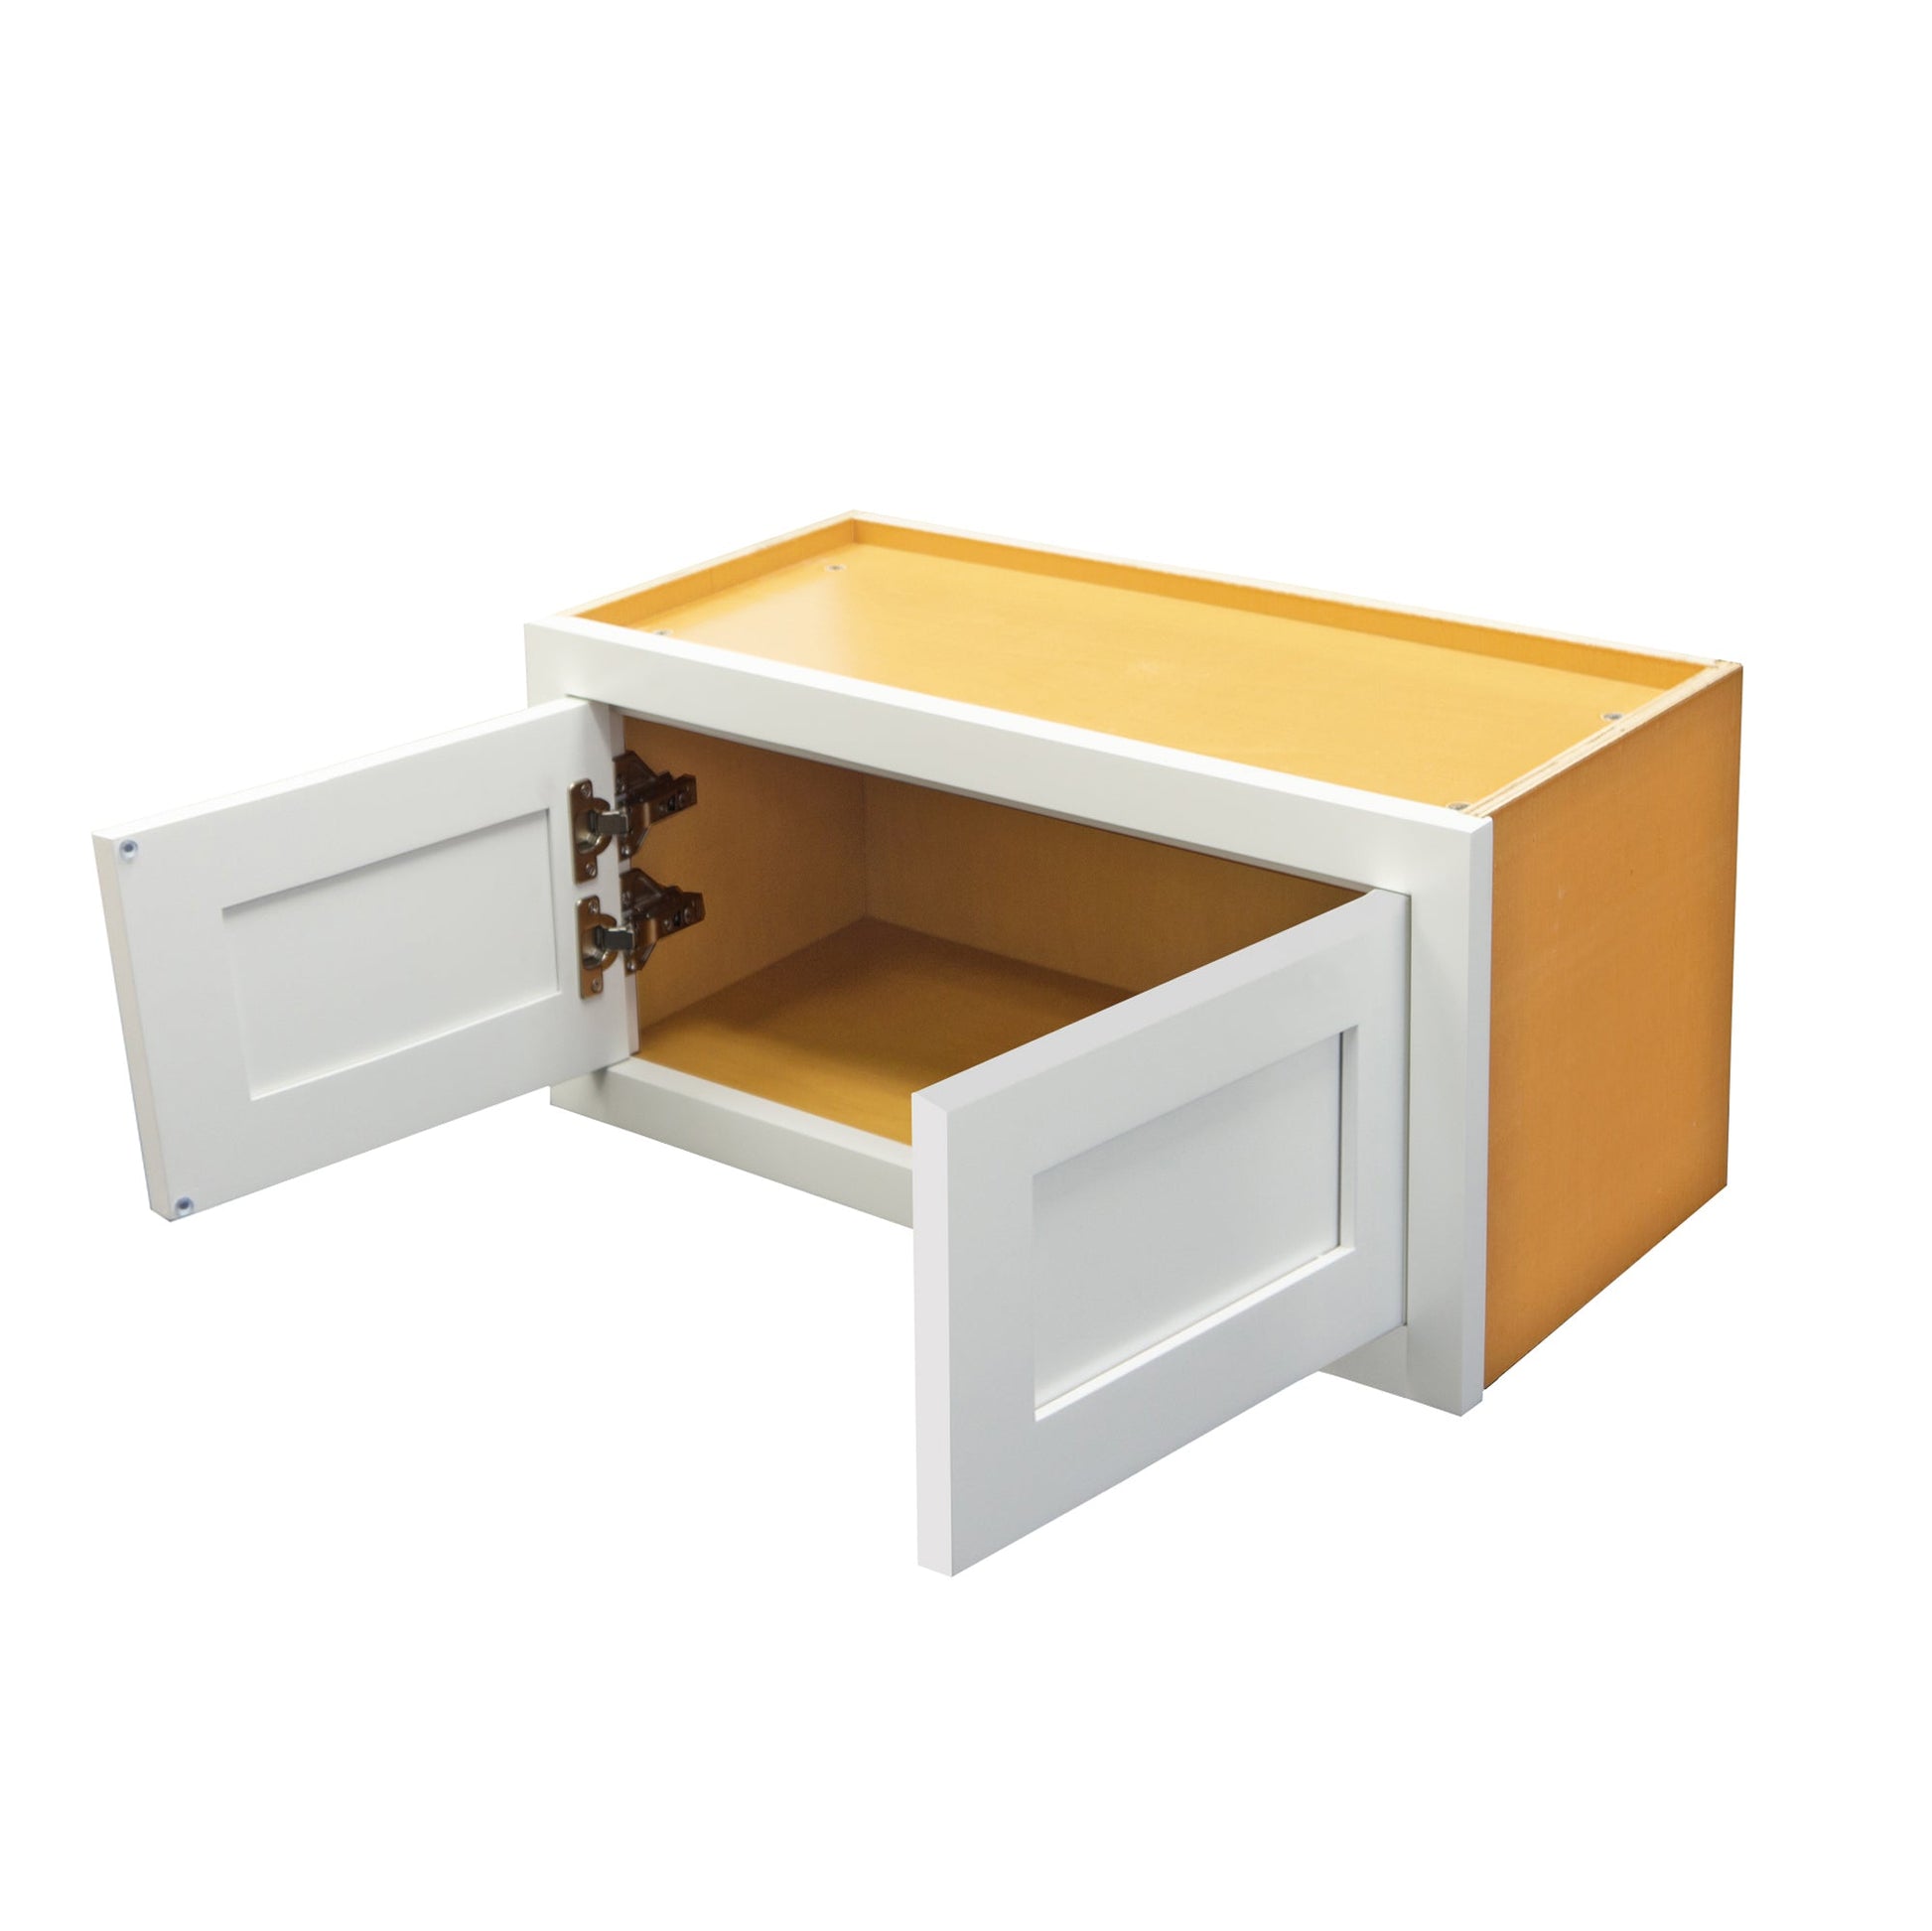 https://kitchenoasis.com/cdn/shop/files/Maplevilles-Cabinetry-36-x-15-24-Deep-Snow-White-Inset-Modern-Shaker-Style-RTA-Birch-Wood-Wall-Storage-Cabinet-With-2-Doors-2.jpg?v=1685856876&width=1946